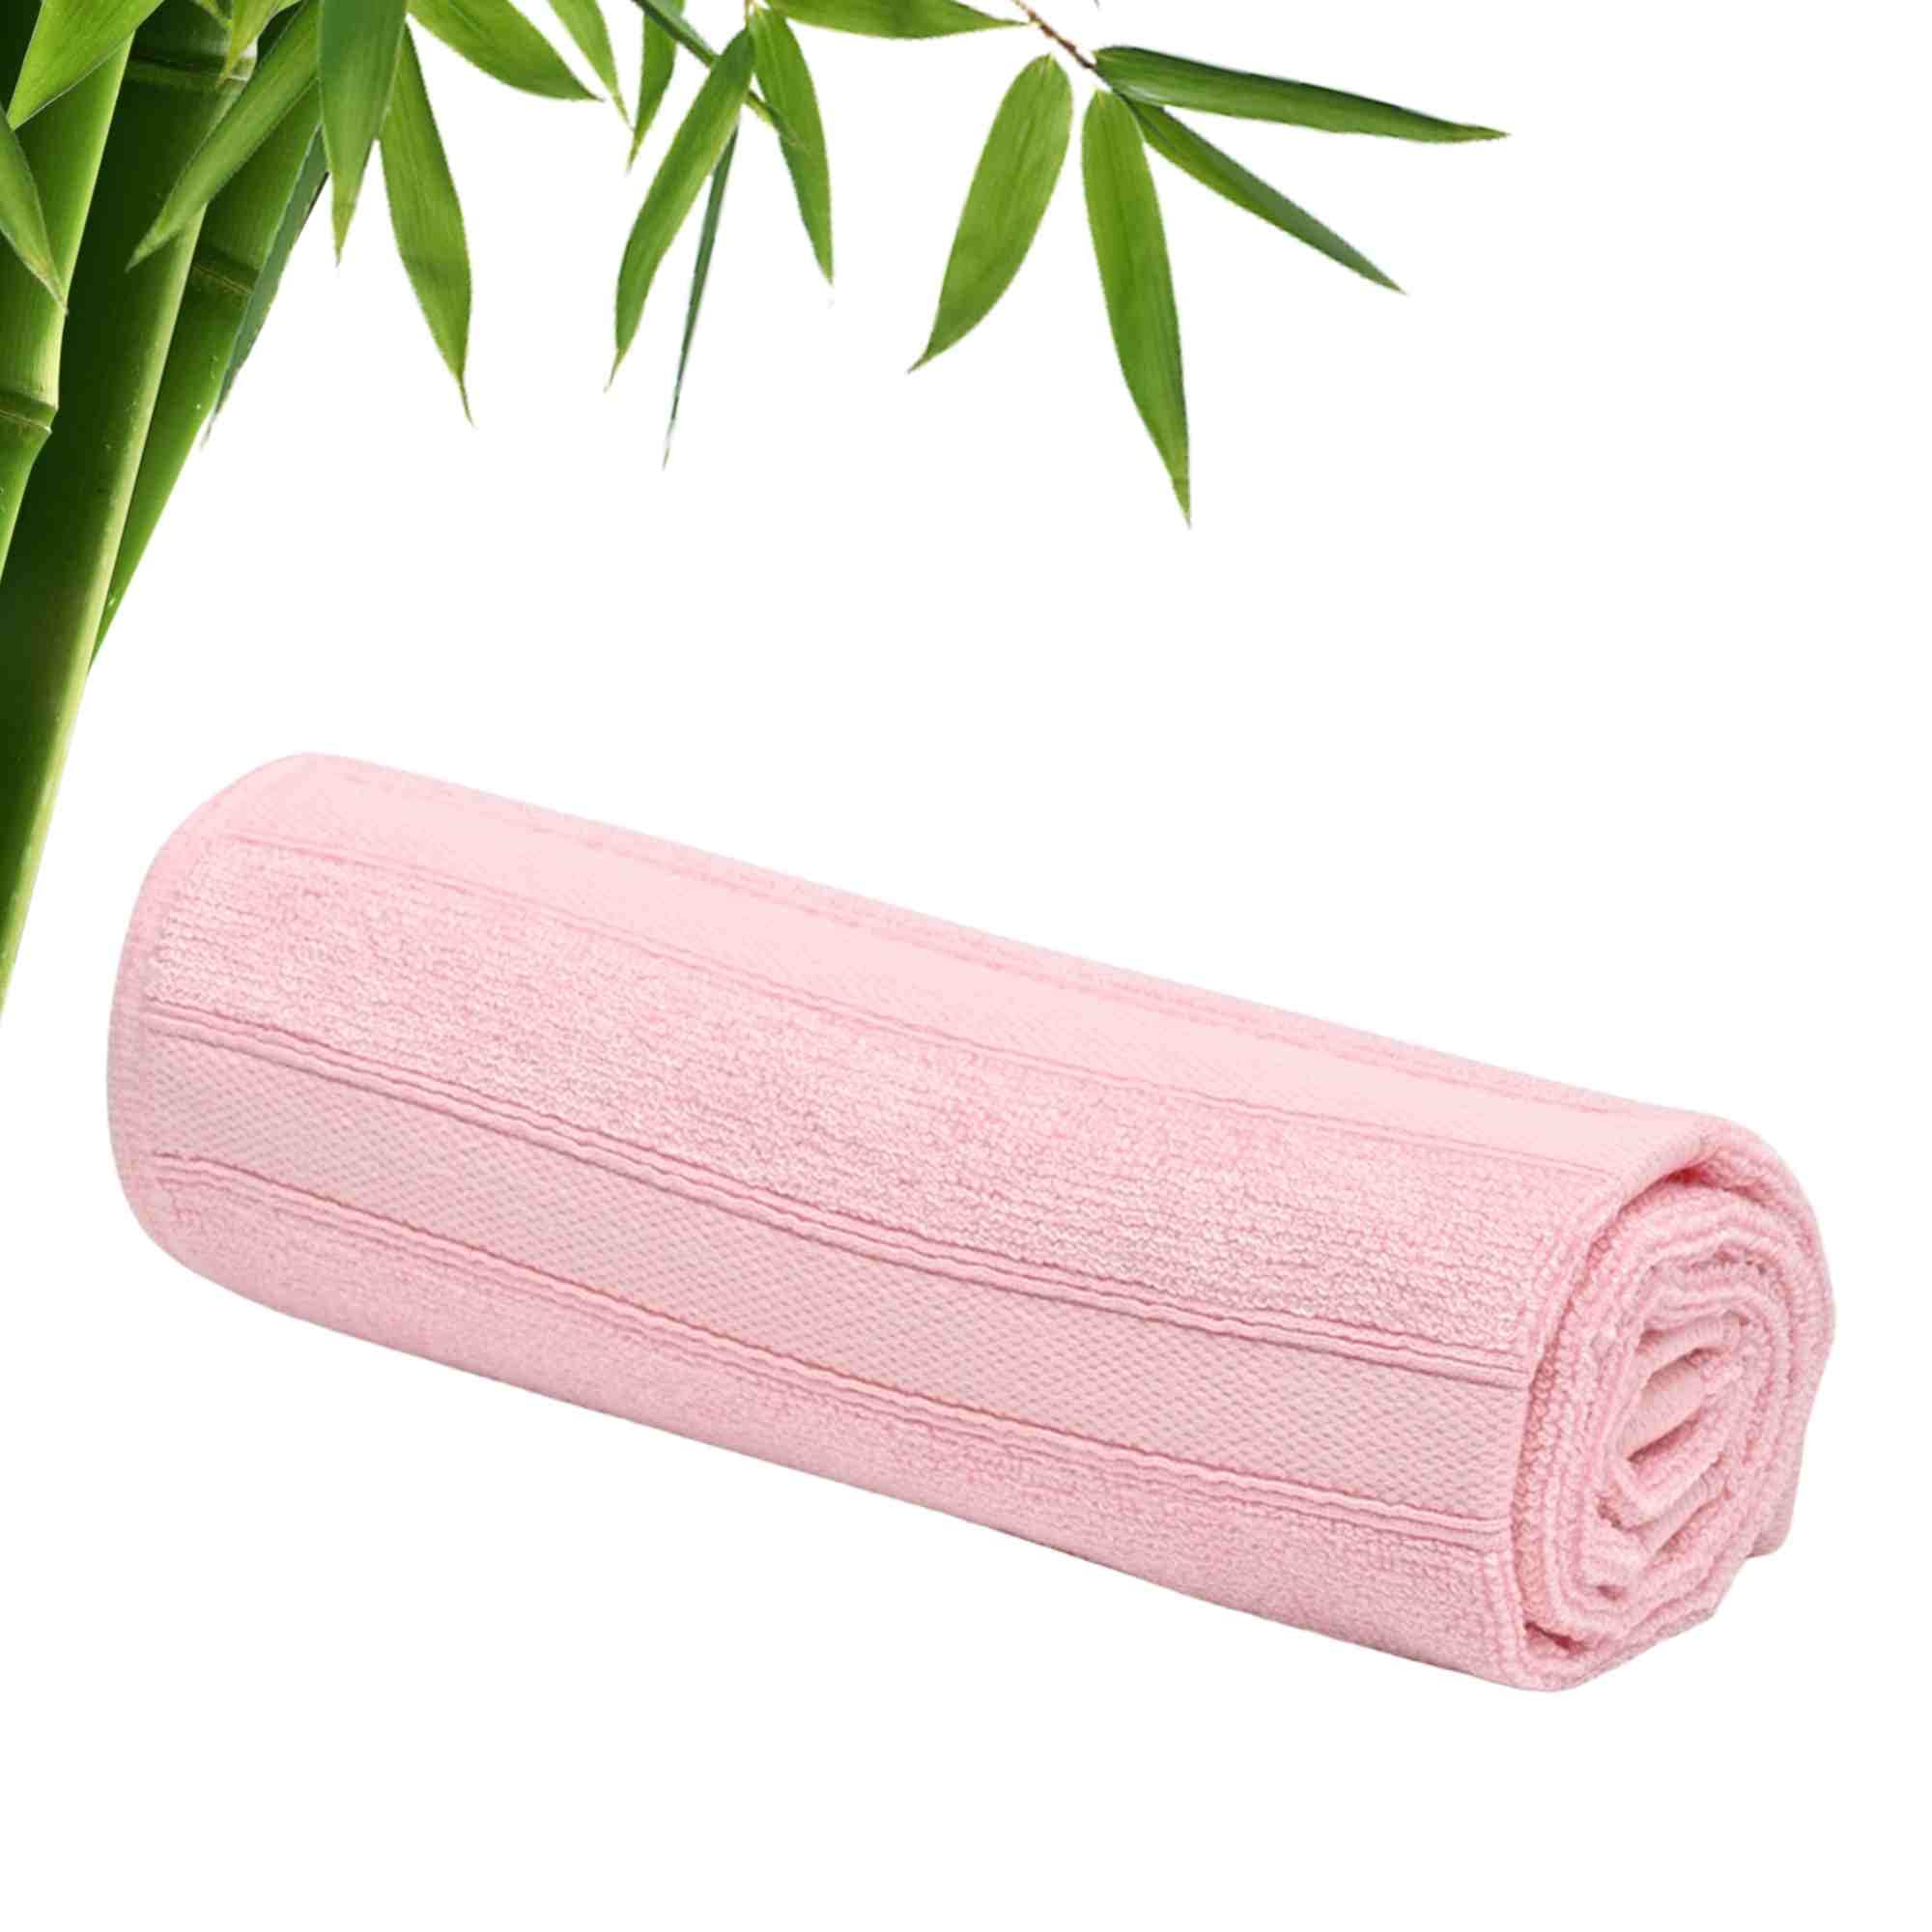 600GSM 100% Bamboo Hand Towel | Anti Odour & Anti Bacterial Bamboo Towel | Ultra Absorbent & Quick Drying Hand & Face Towel for Men & Women (Pack of 1, Pink)